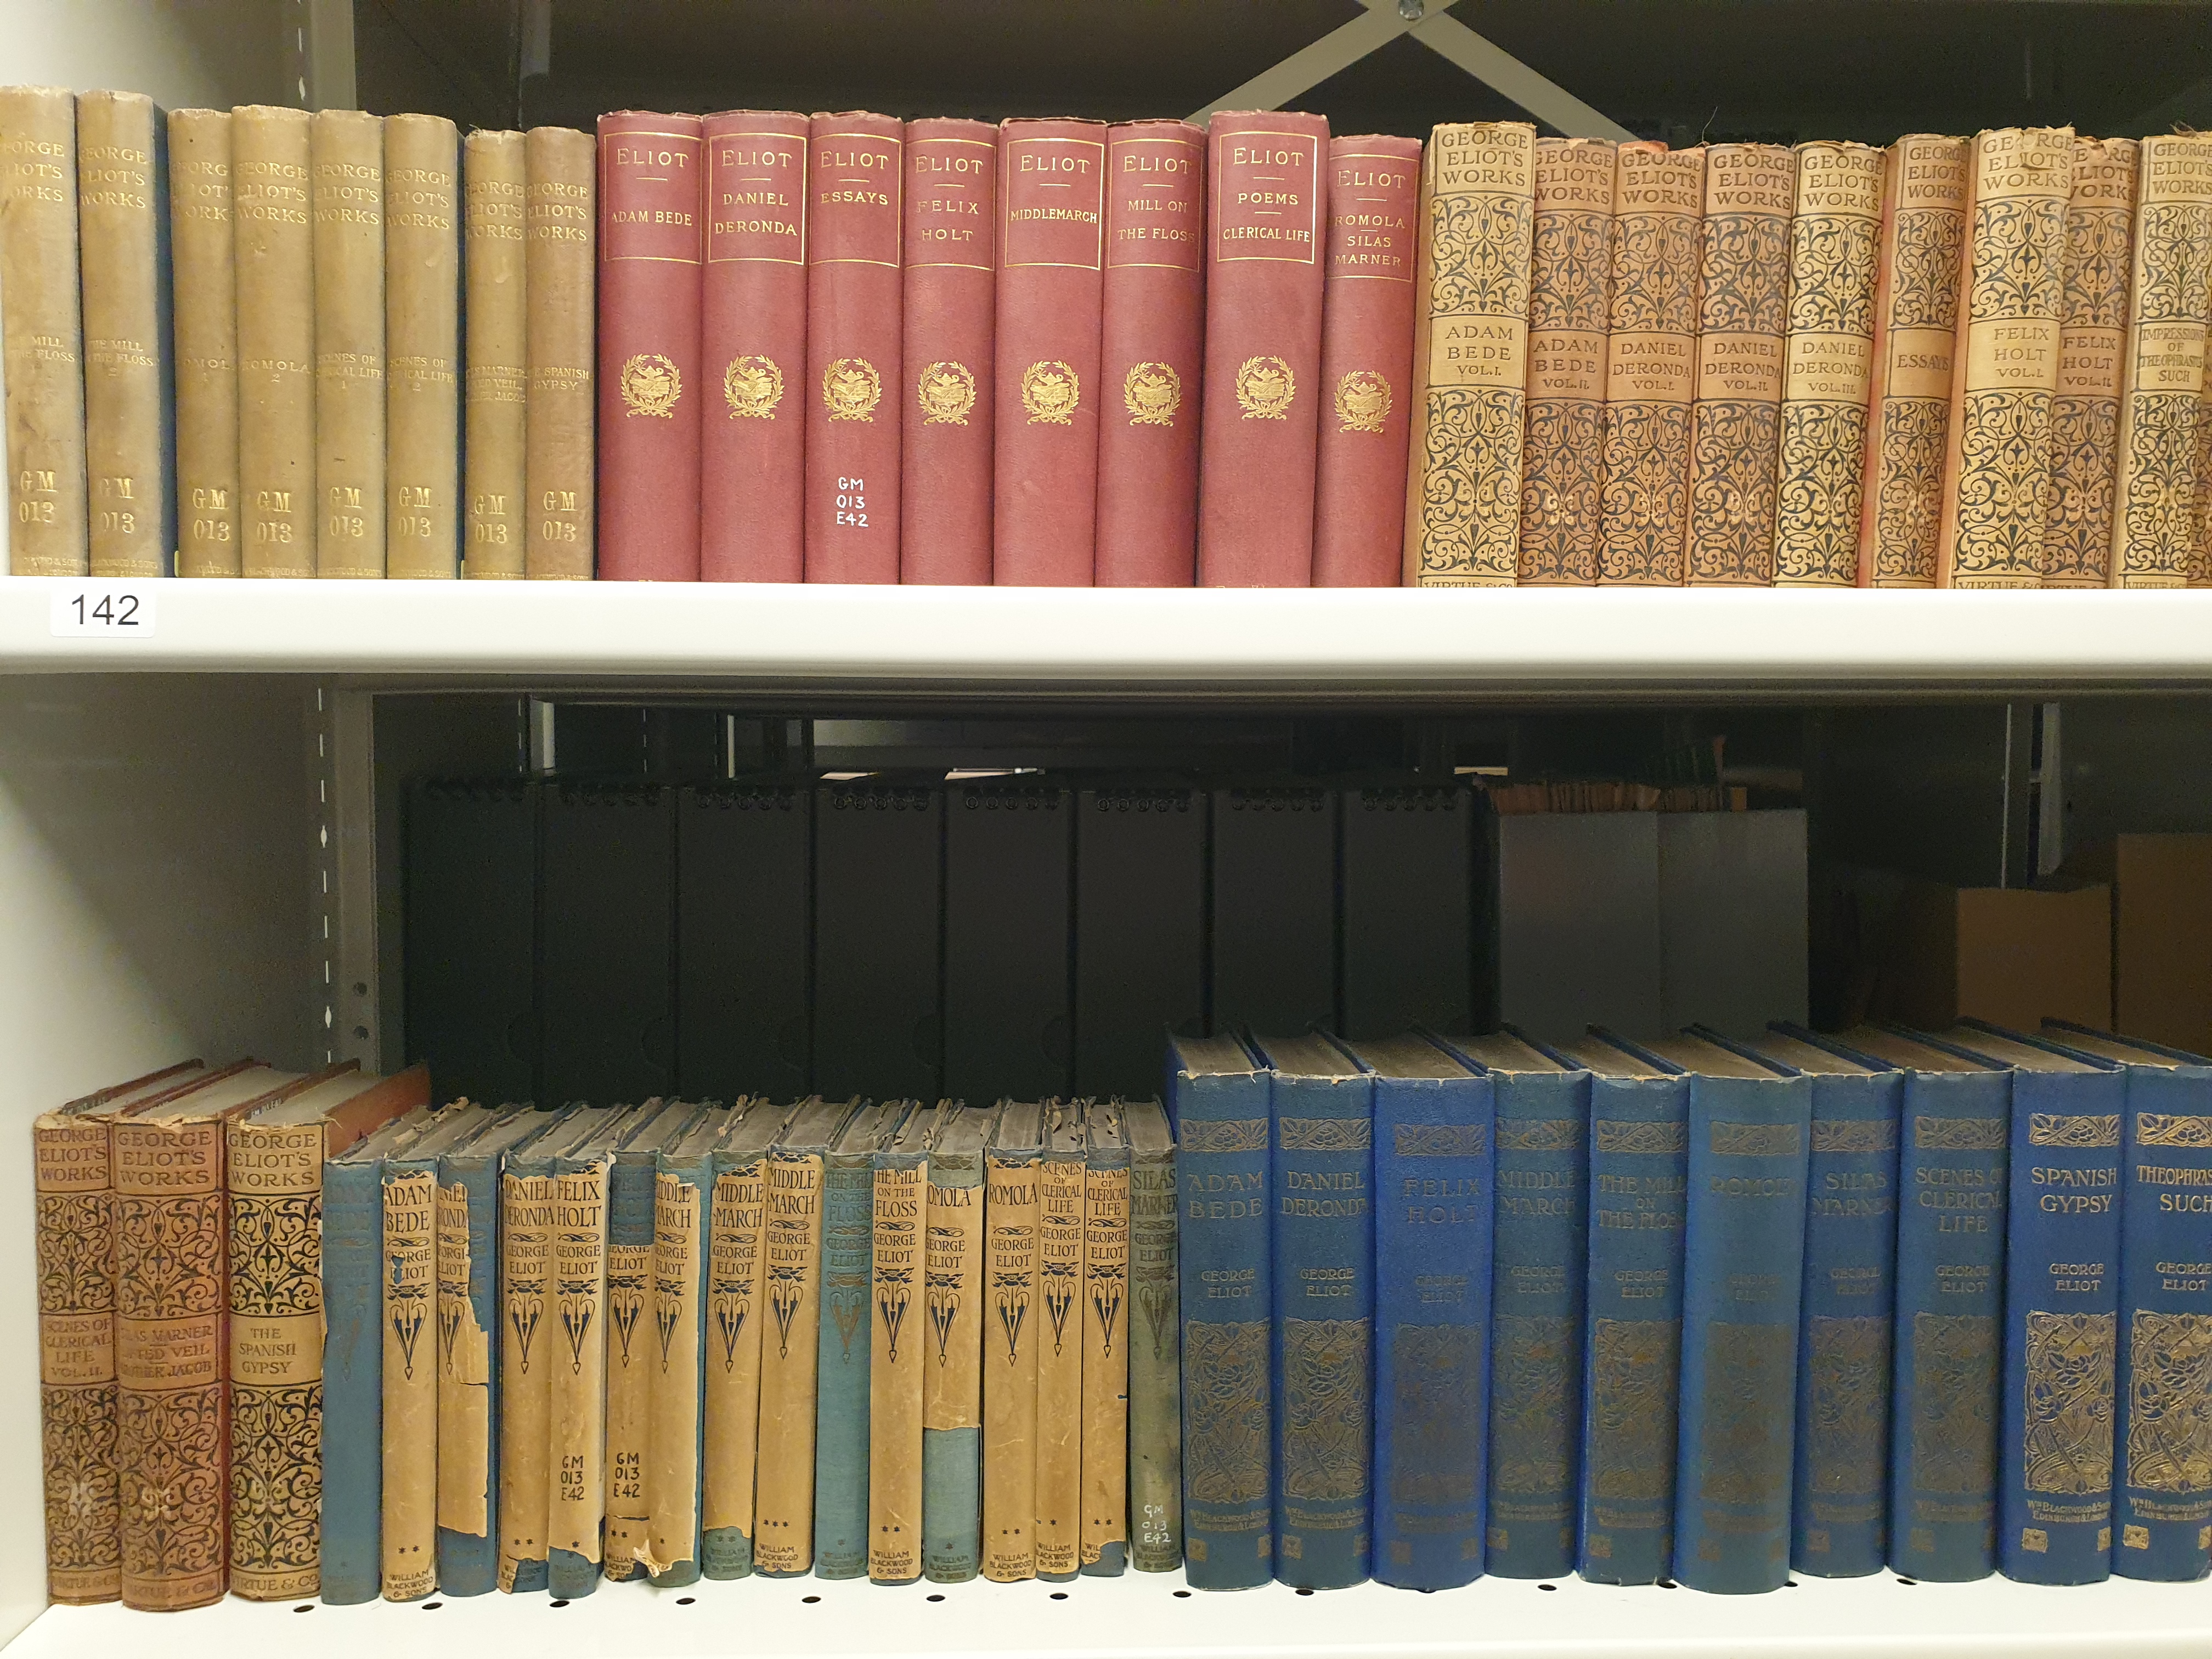 Bookshelves filled with rows of beautifully bound first edition George Eliot novels